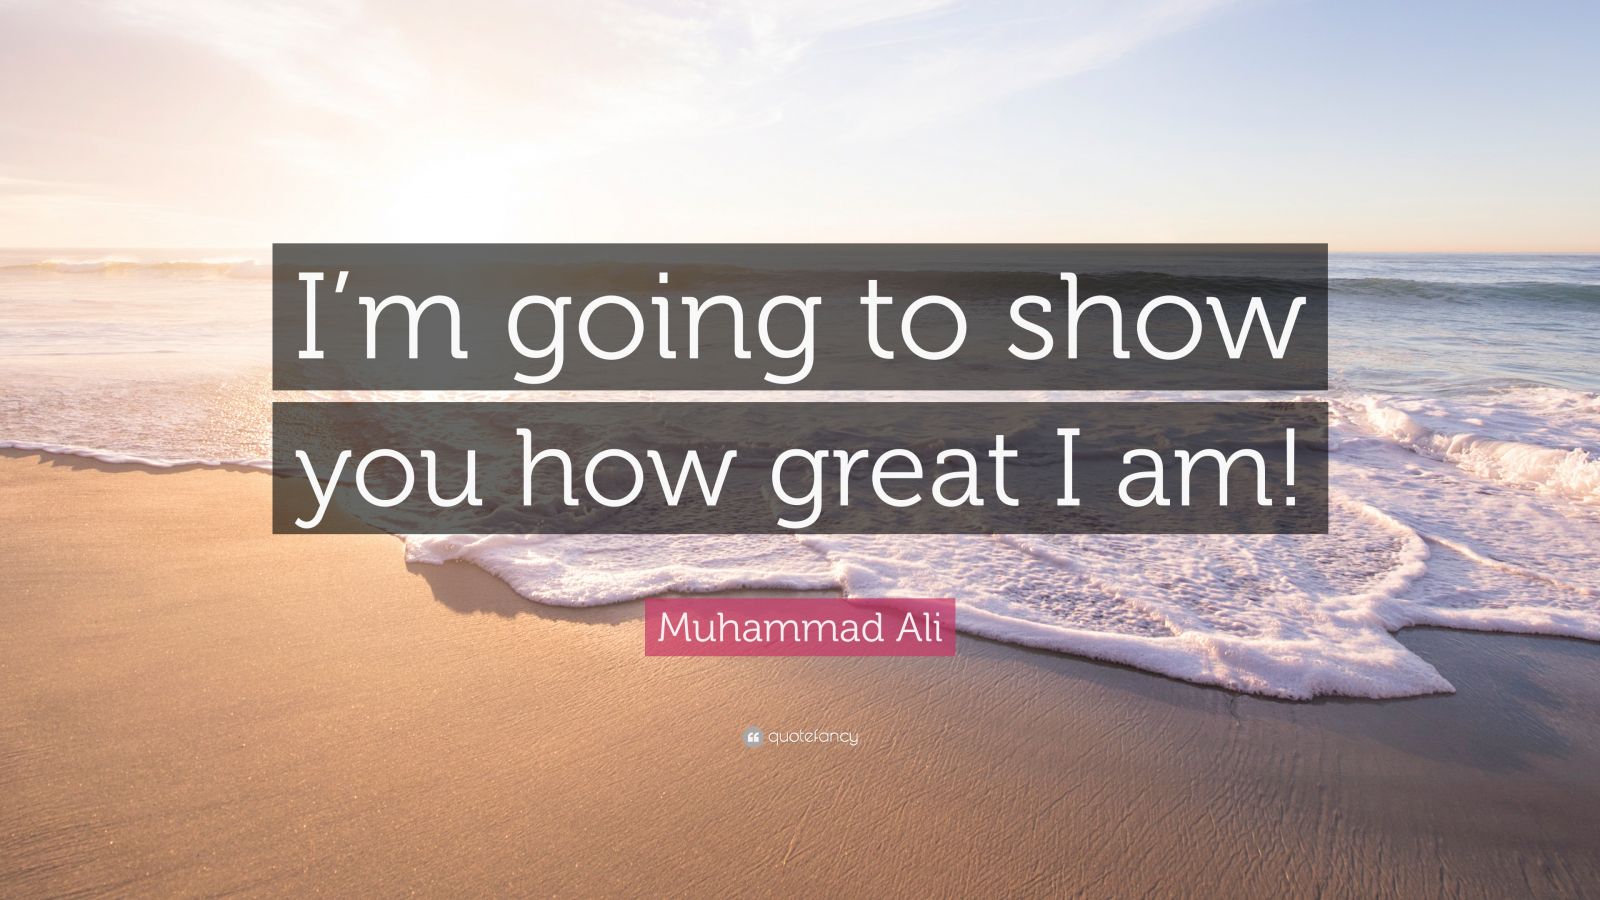 Muhammad Ali Quote “I’m going to show you how great I am!” (12